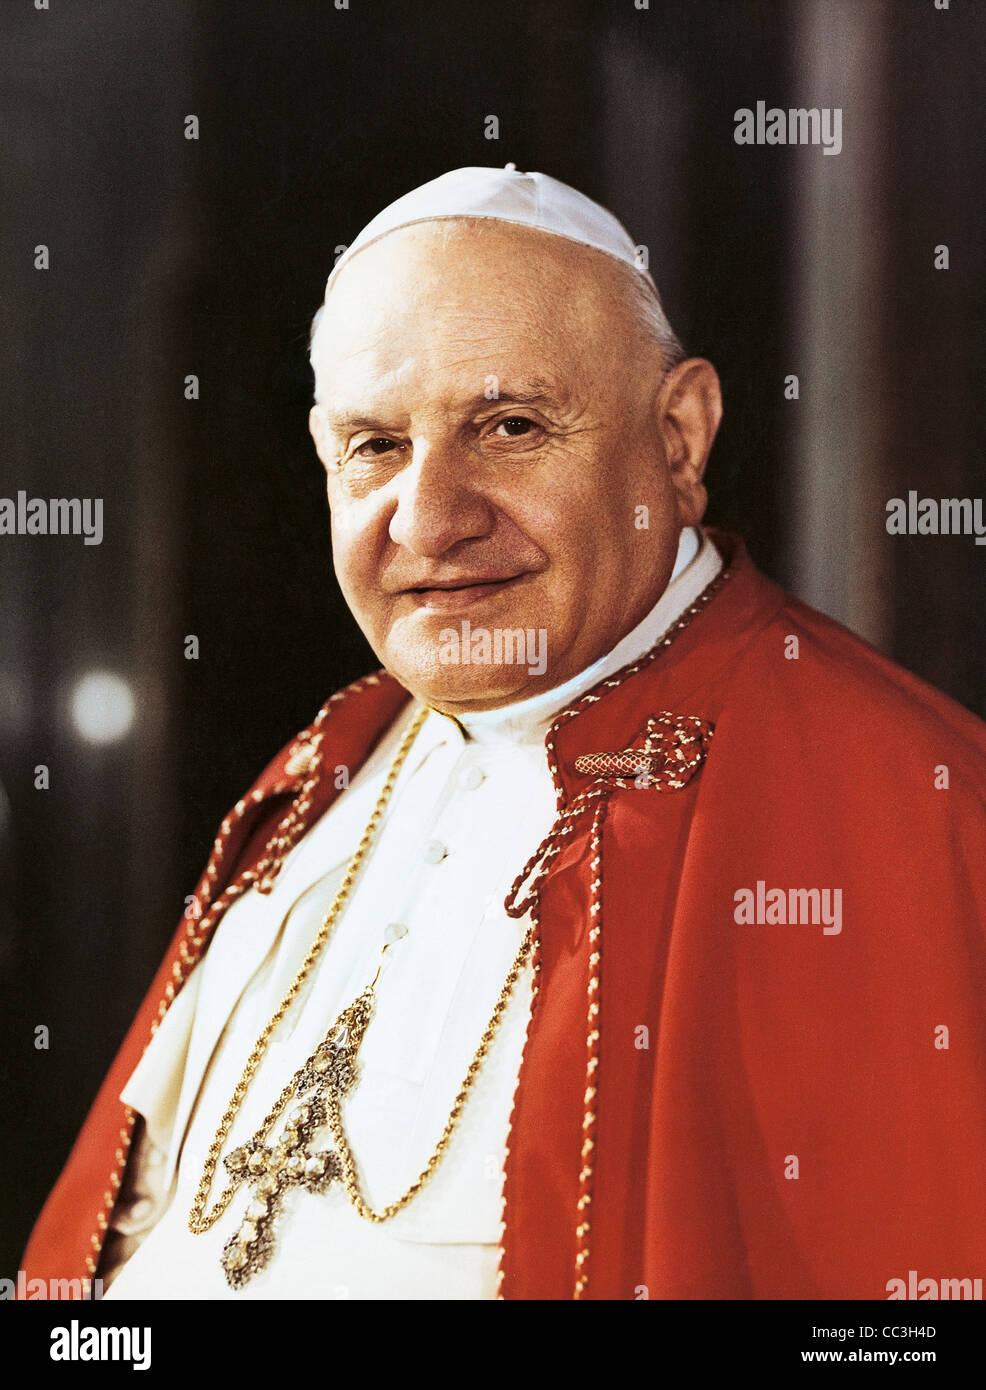 Pope John XXIII (1881-1963) Who Reigned As Pope From 1958. Stock Photo